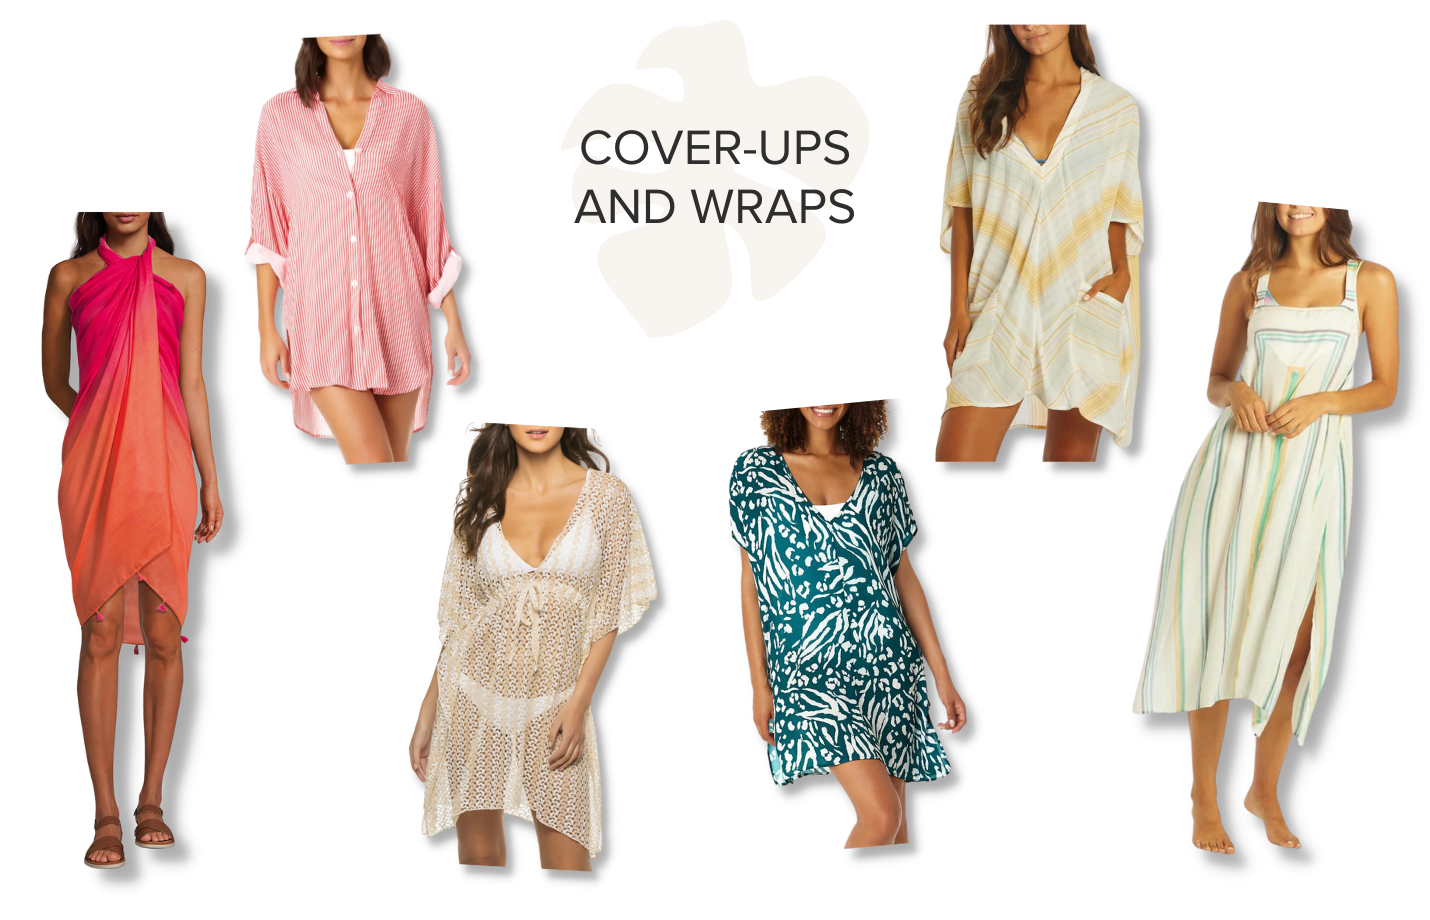 9. Cover-ups